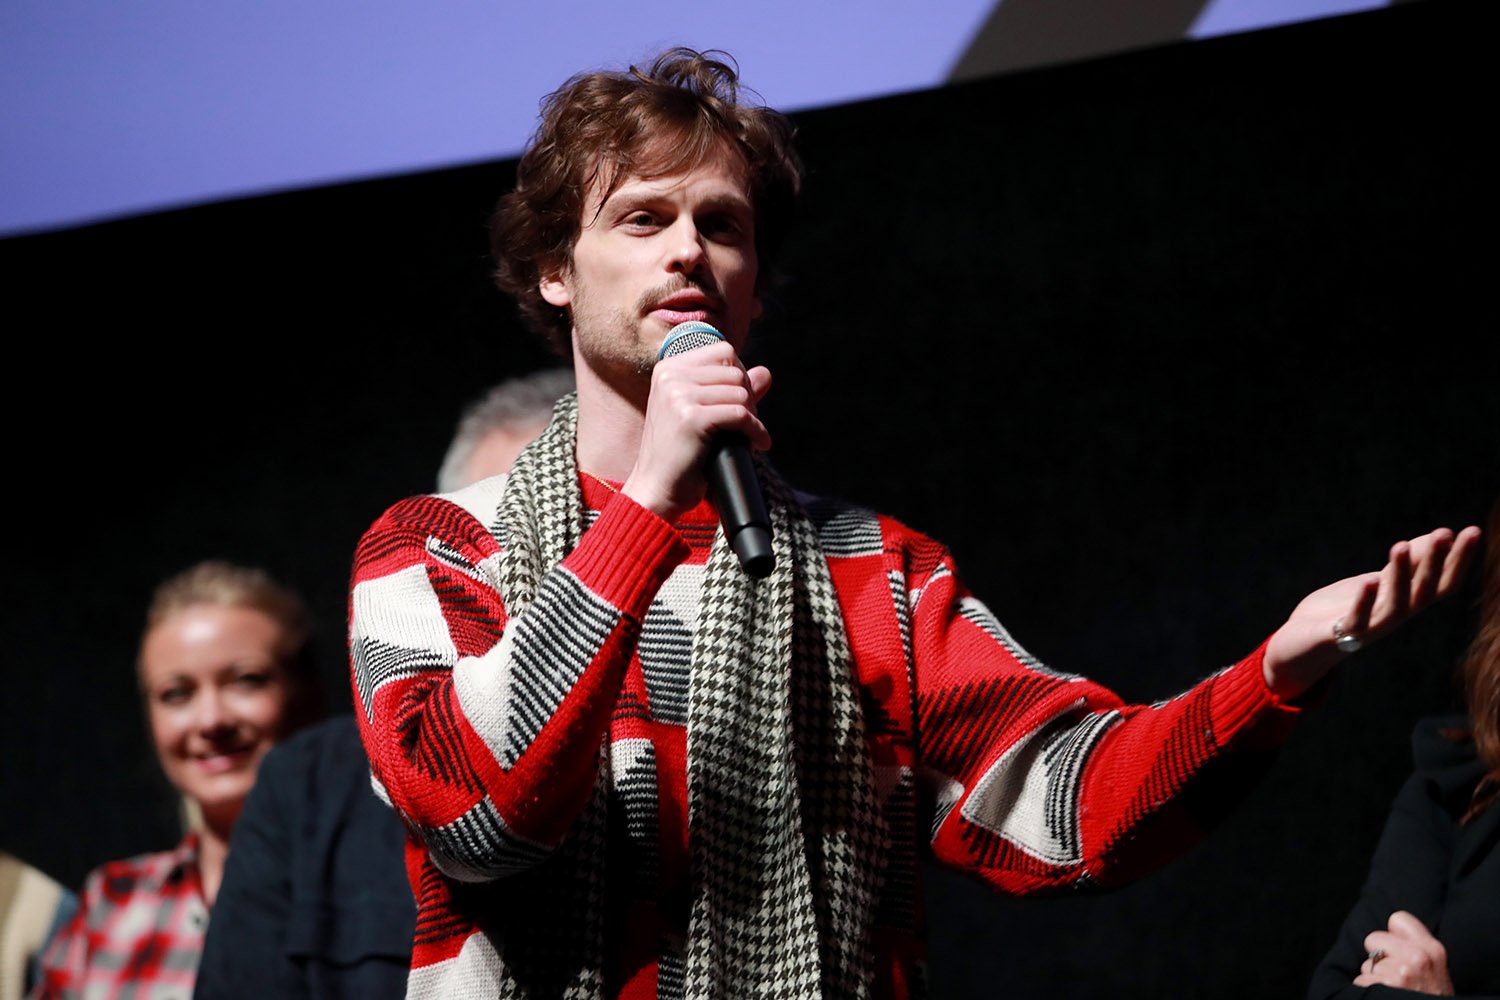 Matthew Gray Guler, who directed several episodes of Criminal Minds, speaks into a microphone while wearing a red, gray, and white patterned sweater at Sundance in 2020